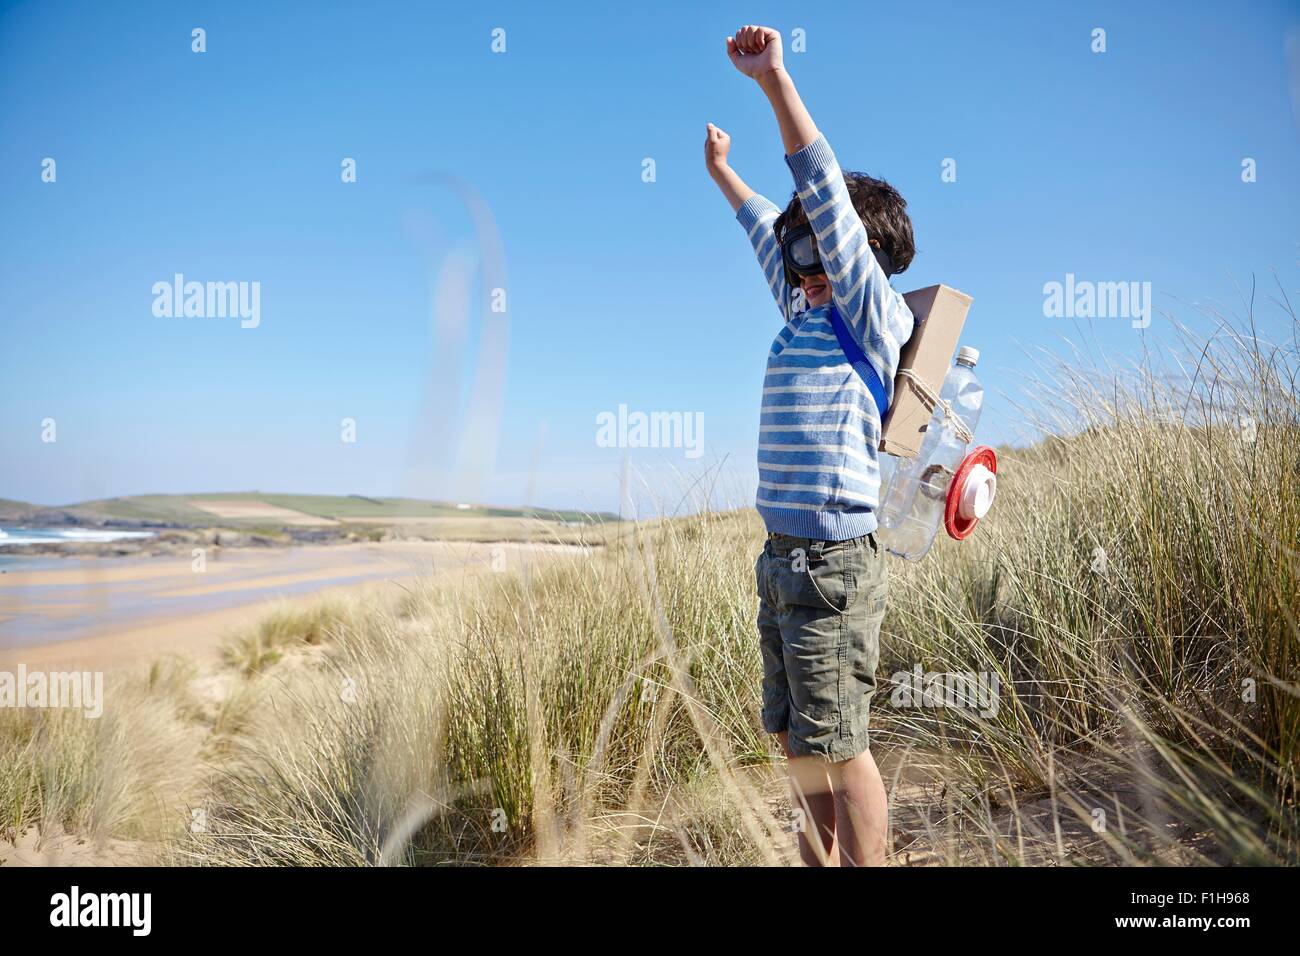 Young boy on beach, wearing fancy dress, arms raised Stock Photo